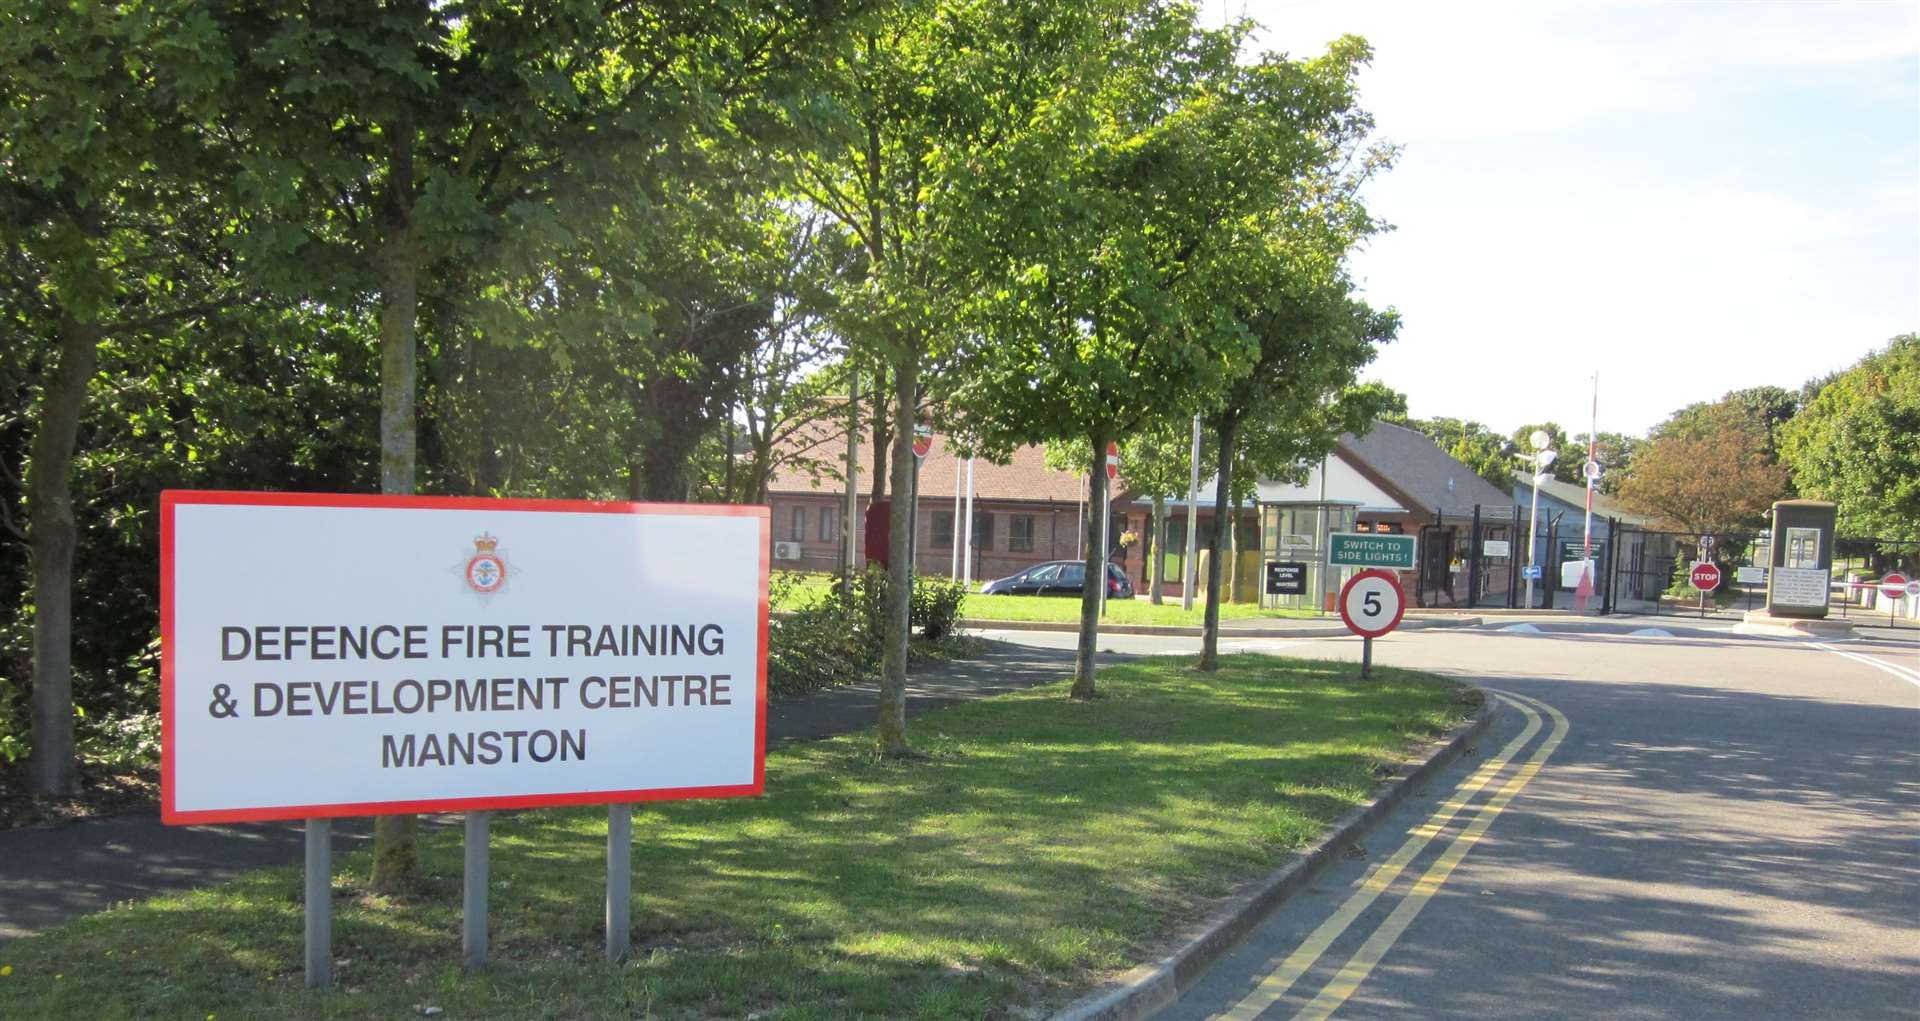 The Defence Fire Training and Development Centre in Manston